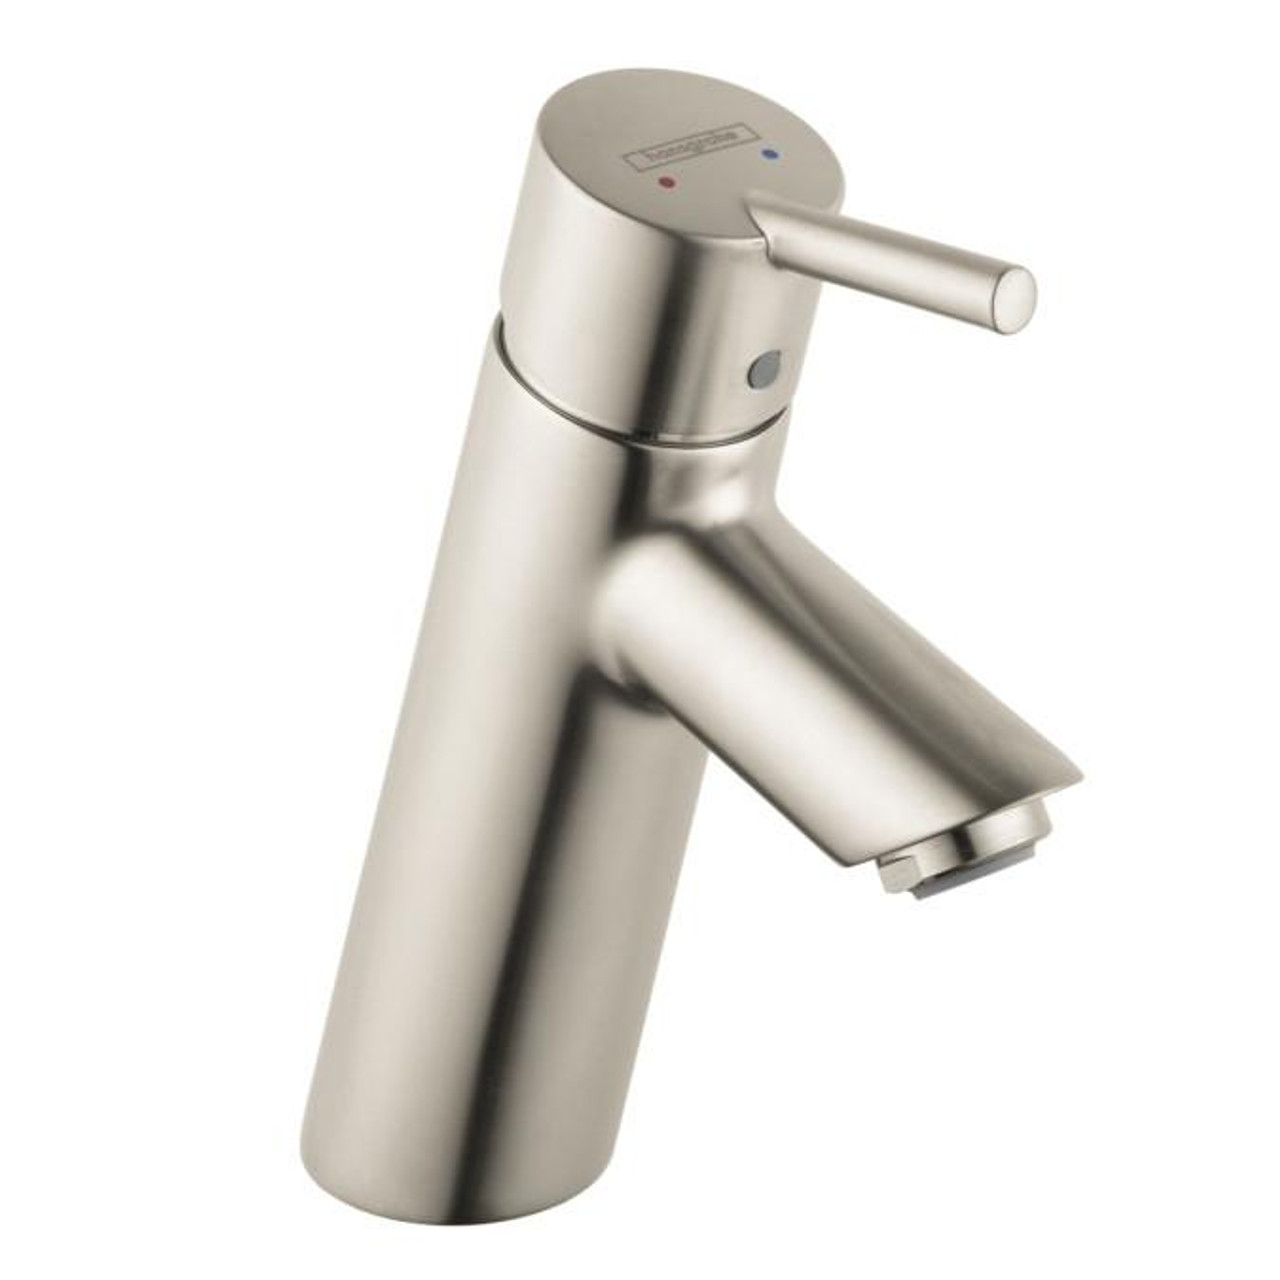 Hansgrohe Talis S Single Hole Faucet Brushed Nickel Finish York Taps